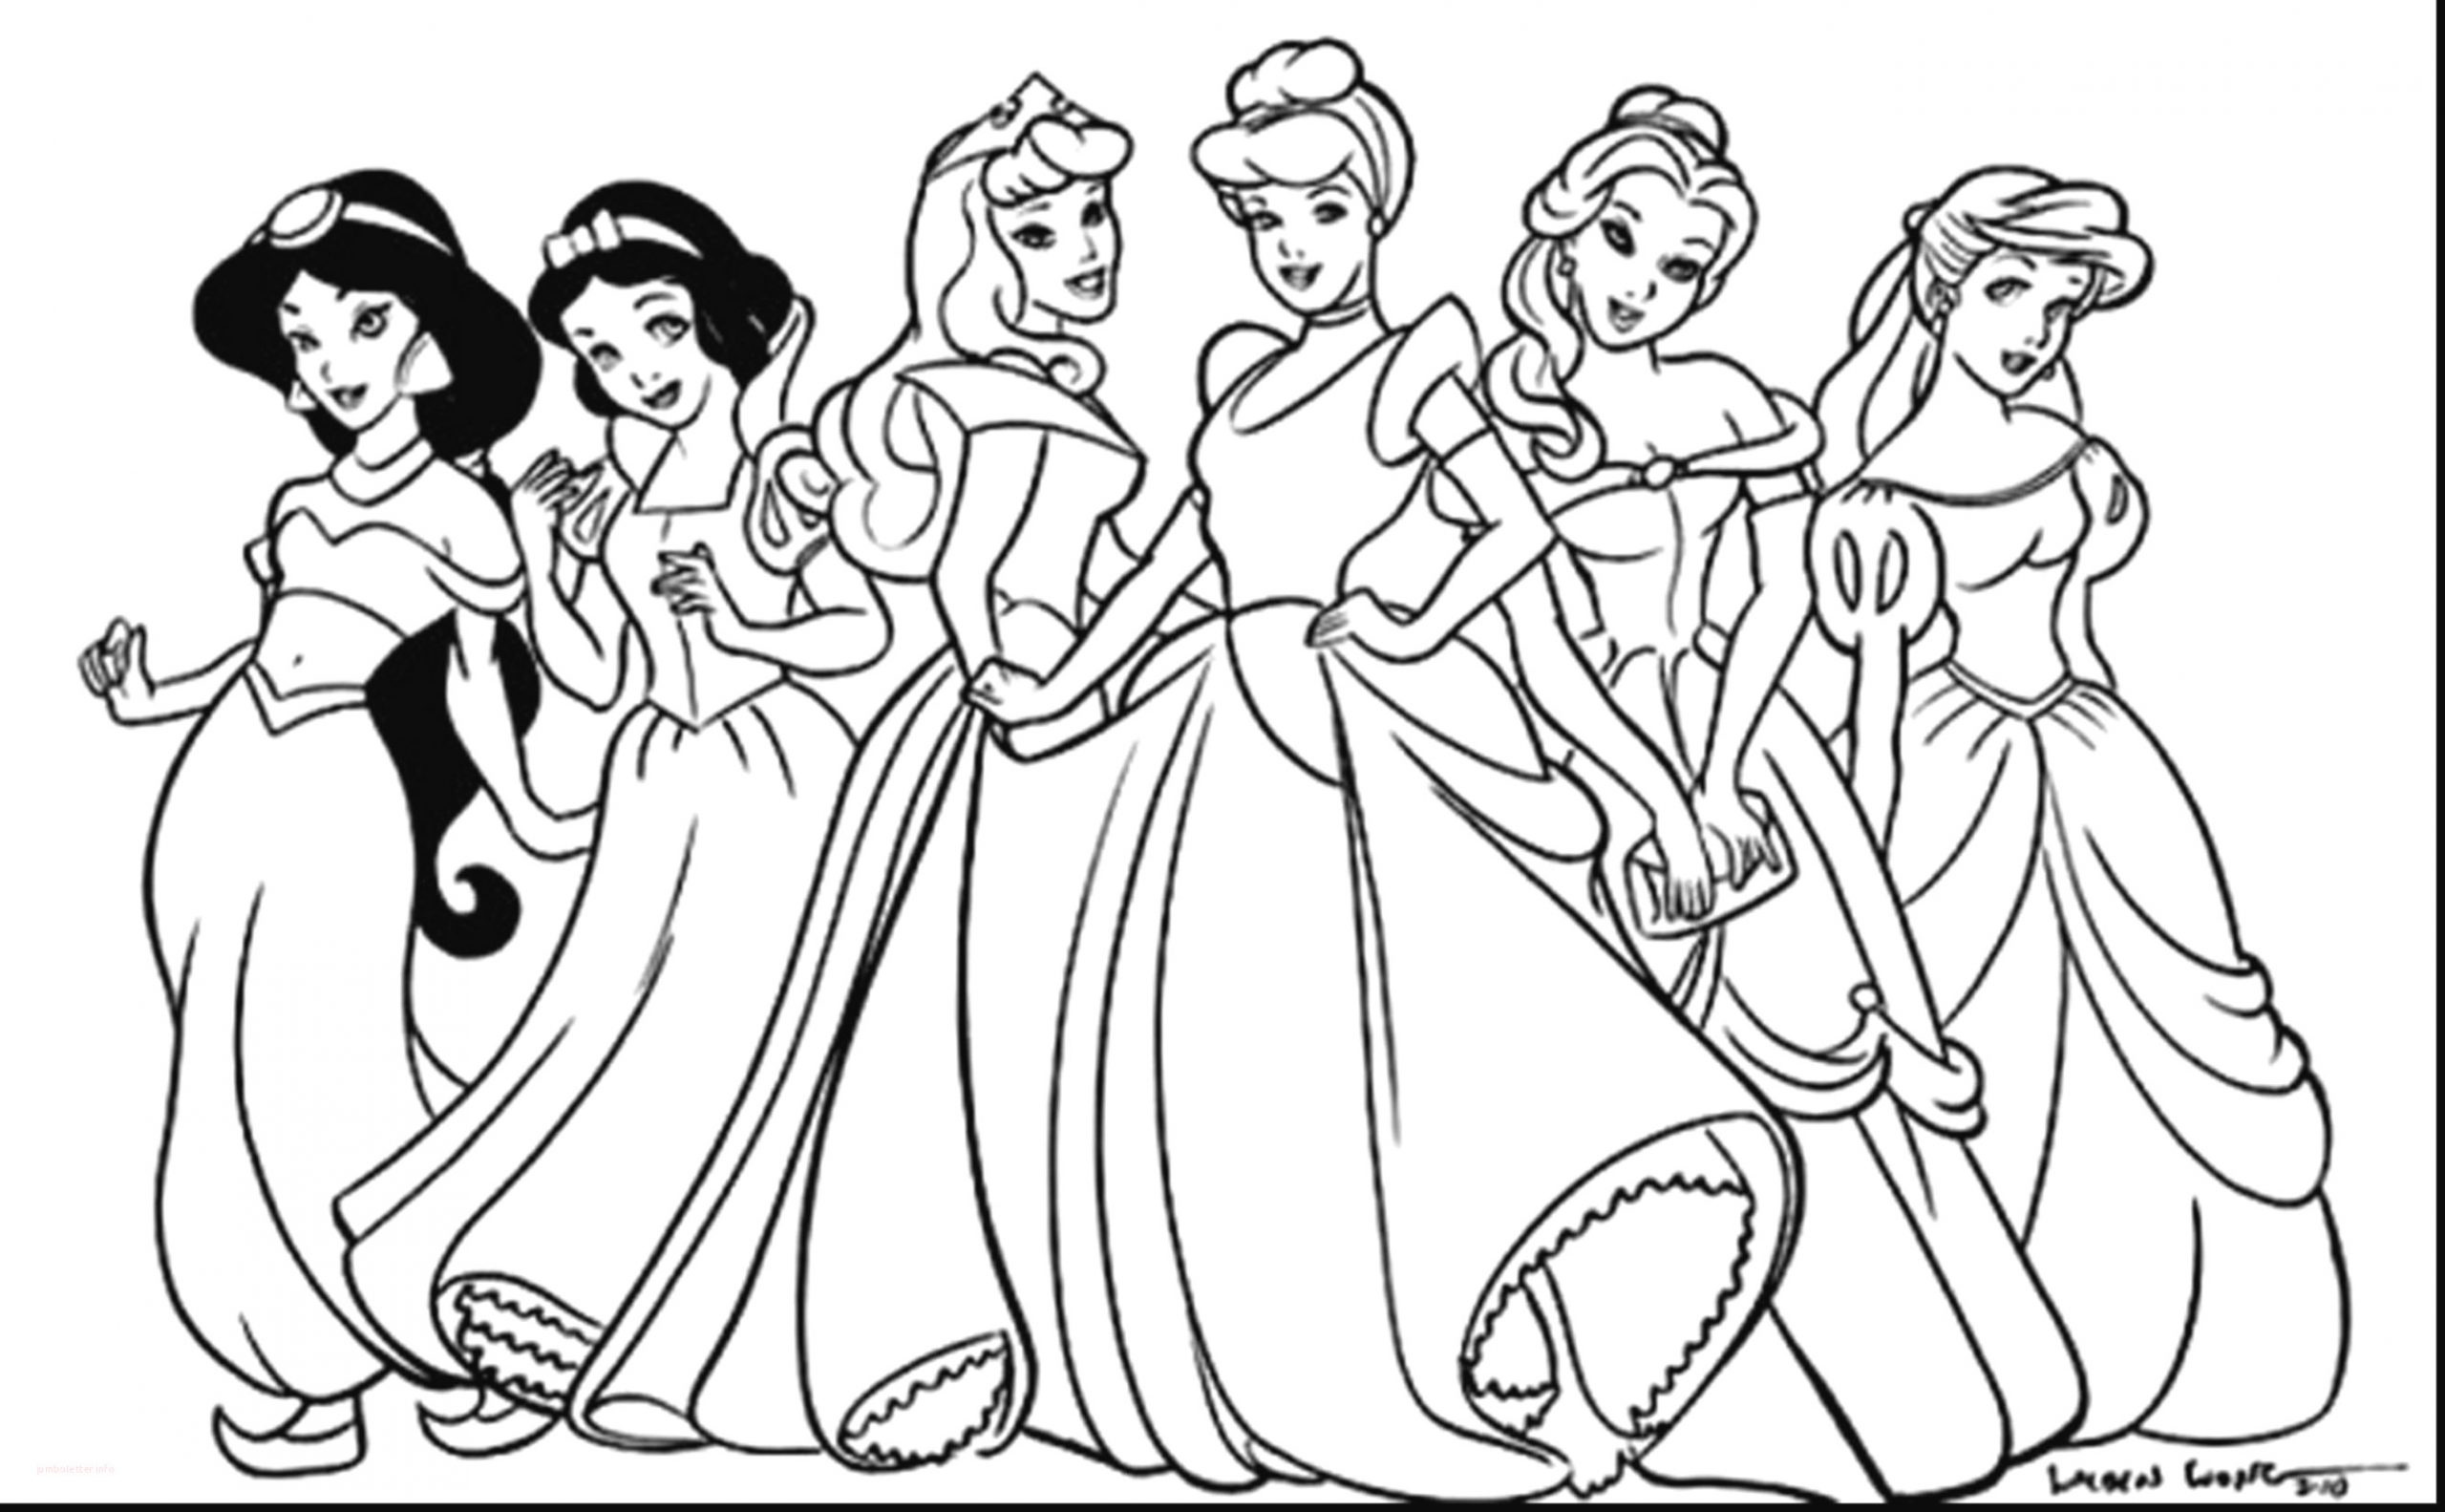 Coloring Pages : Bathroom Frees Coloring For Adults Unicorn To ...